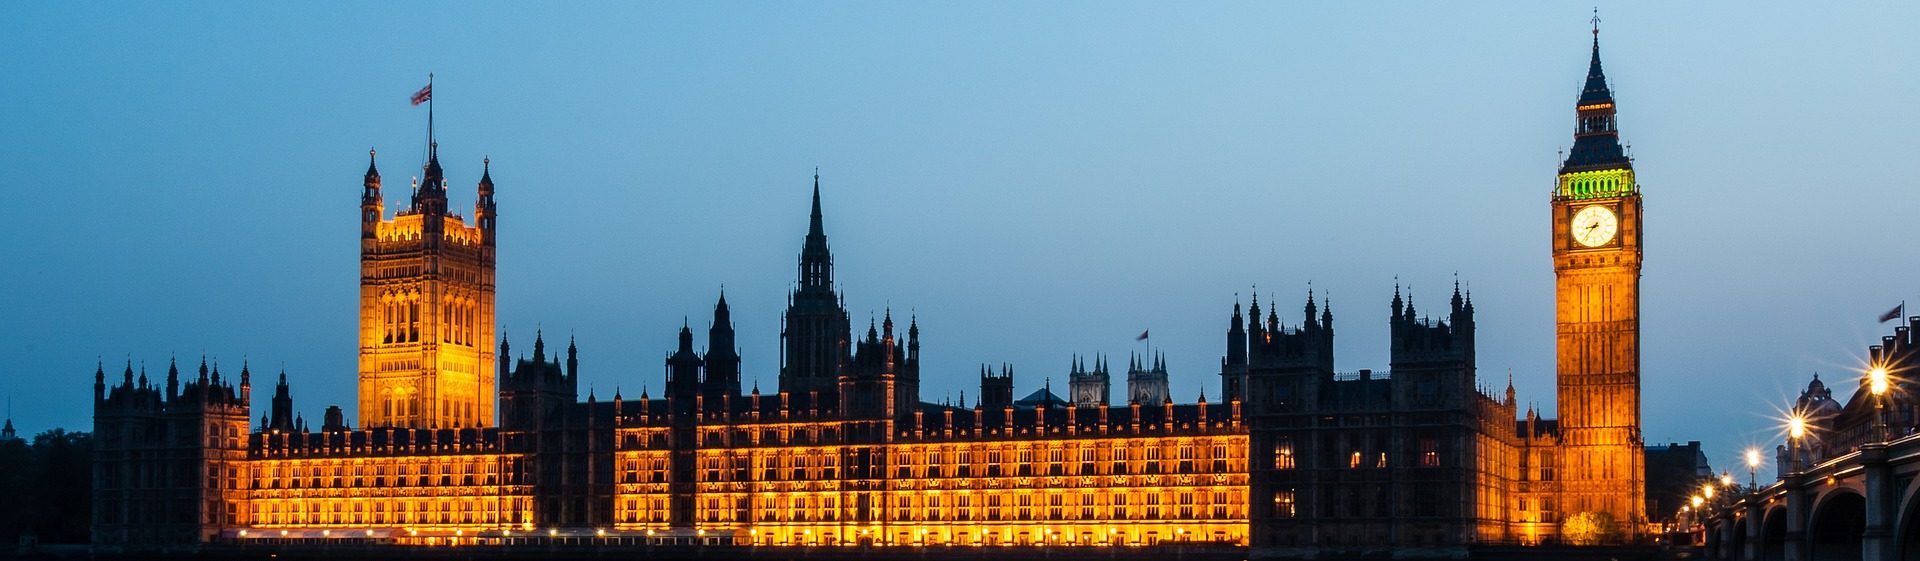 houses-of-parliament-at-night-1